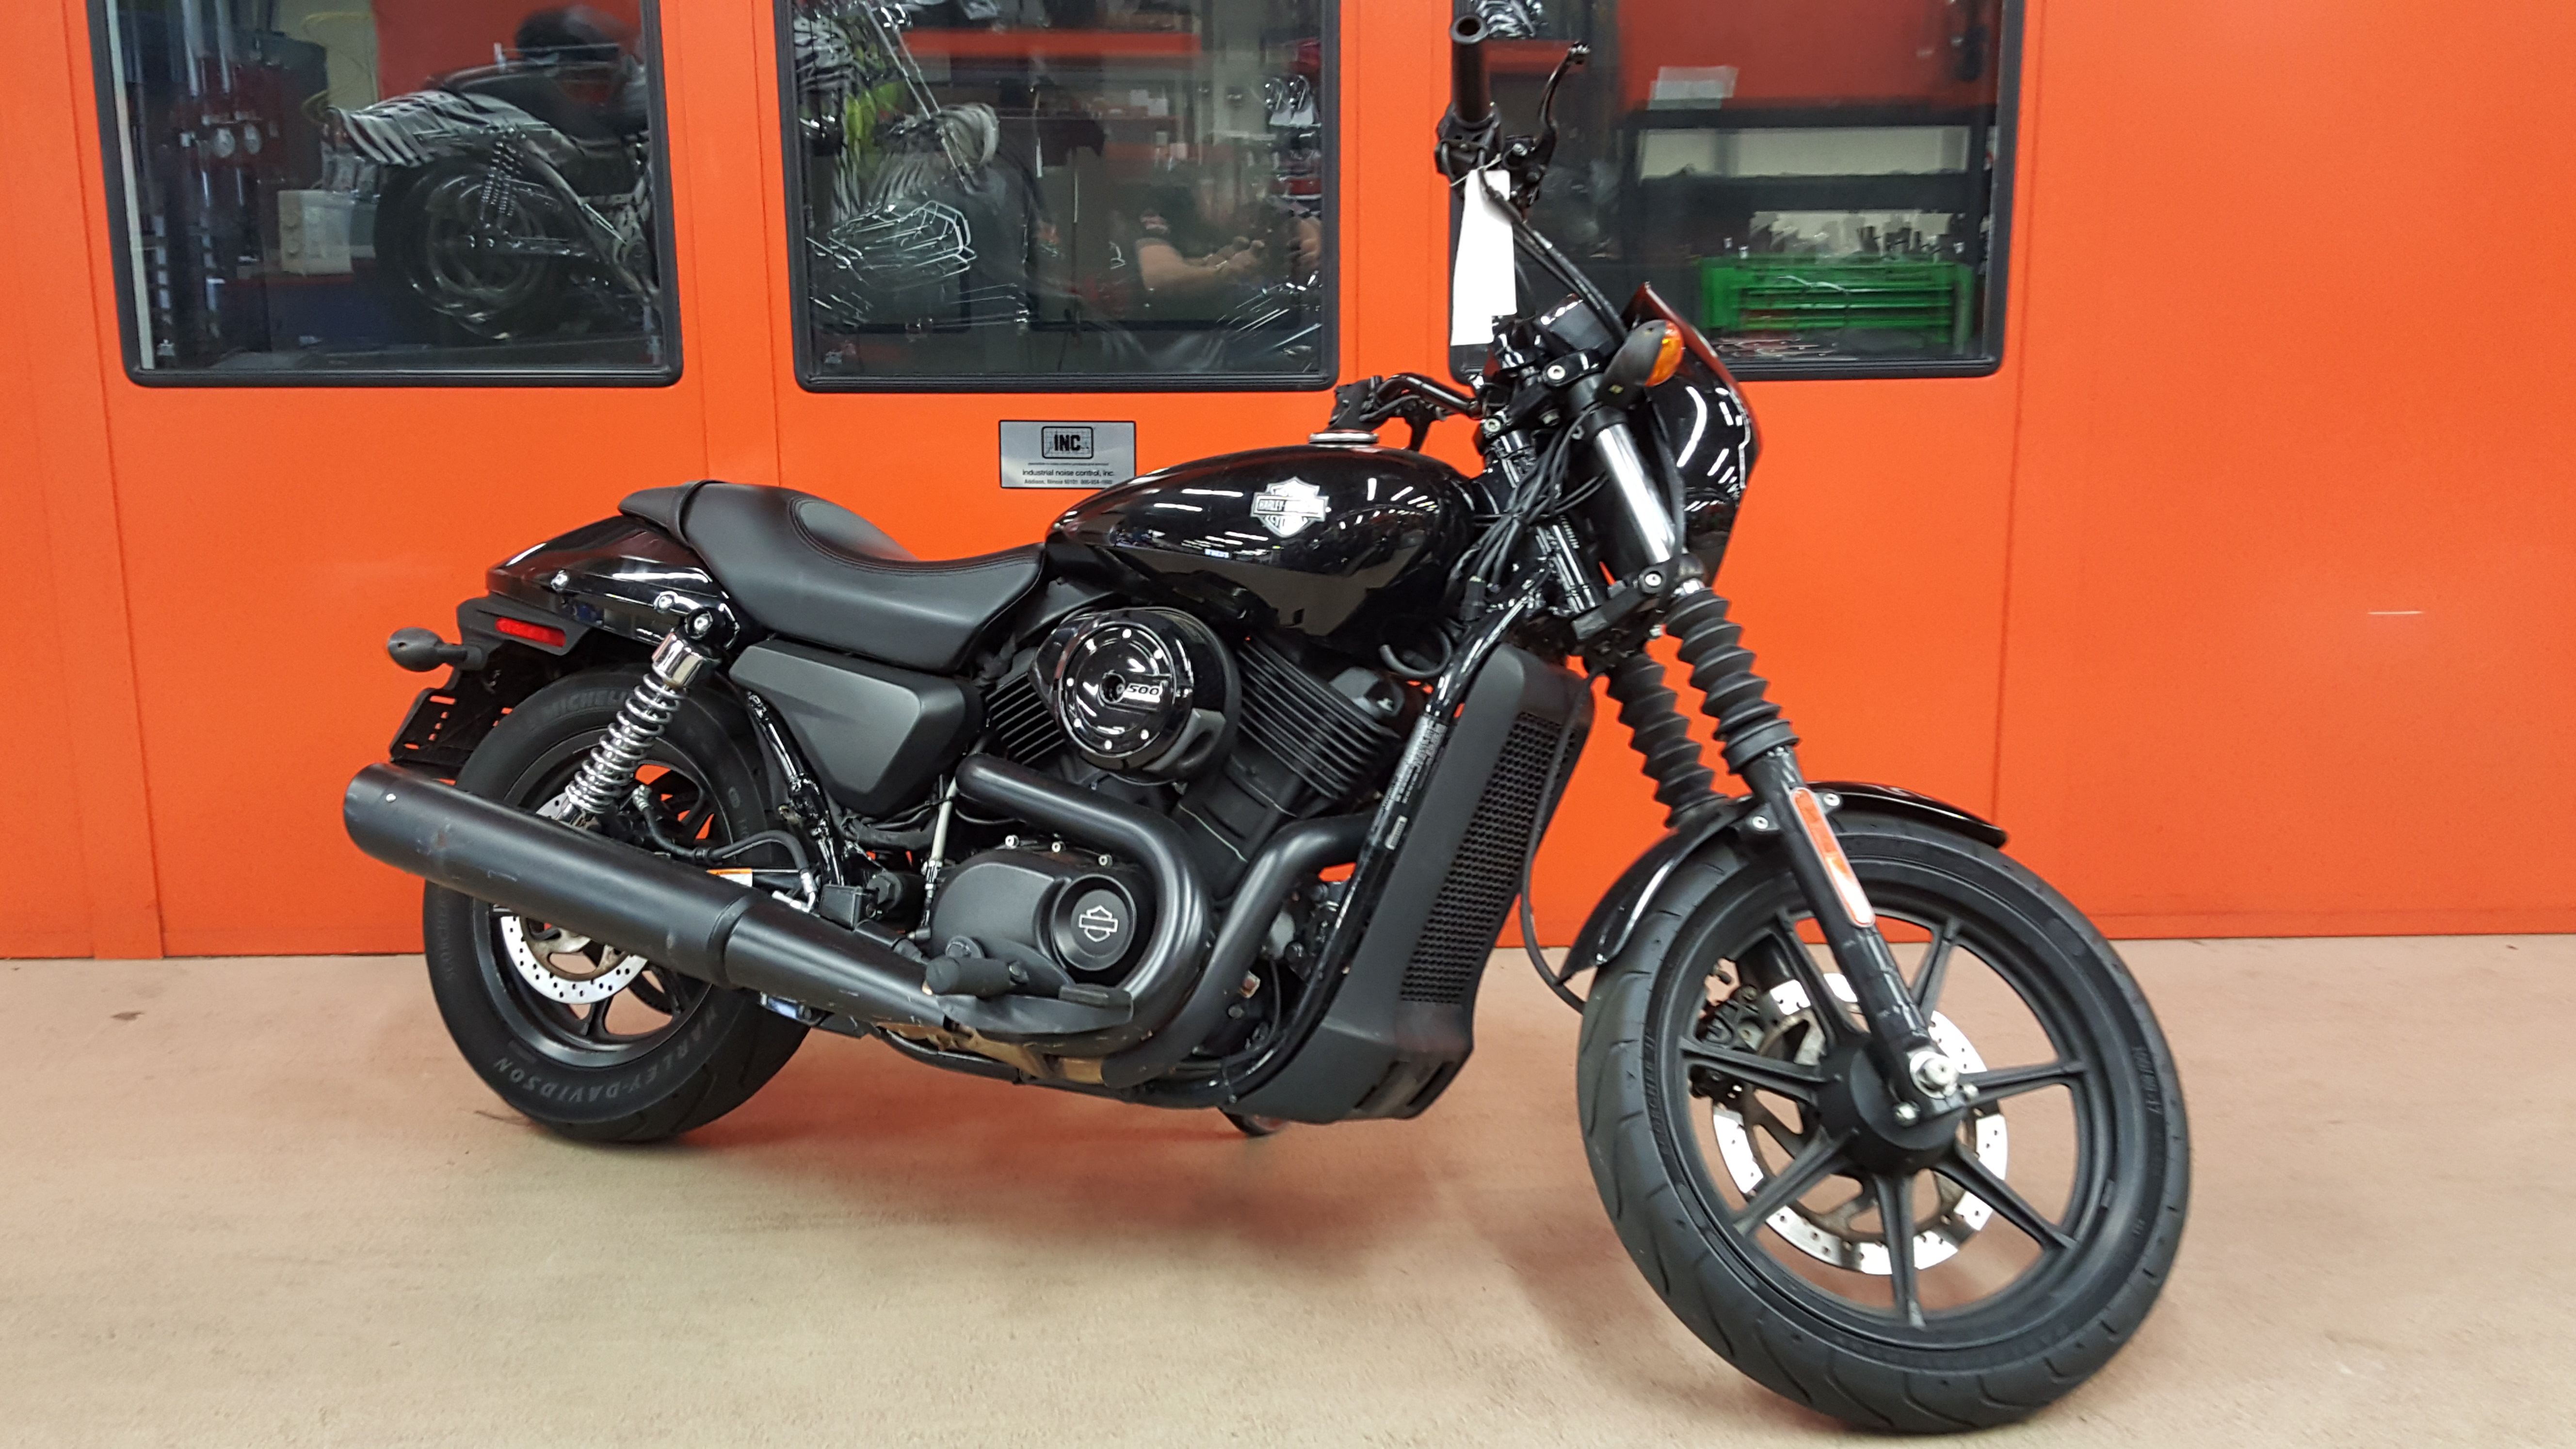 Pre-Owned 2015 Harley-Davidson Street 500 in Palm Bay #500313 | Space